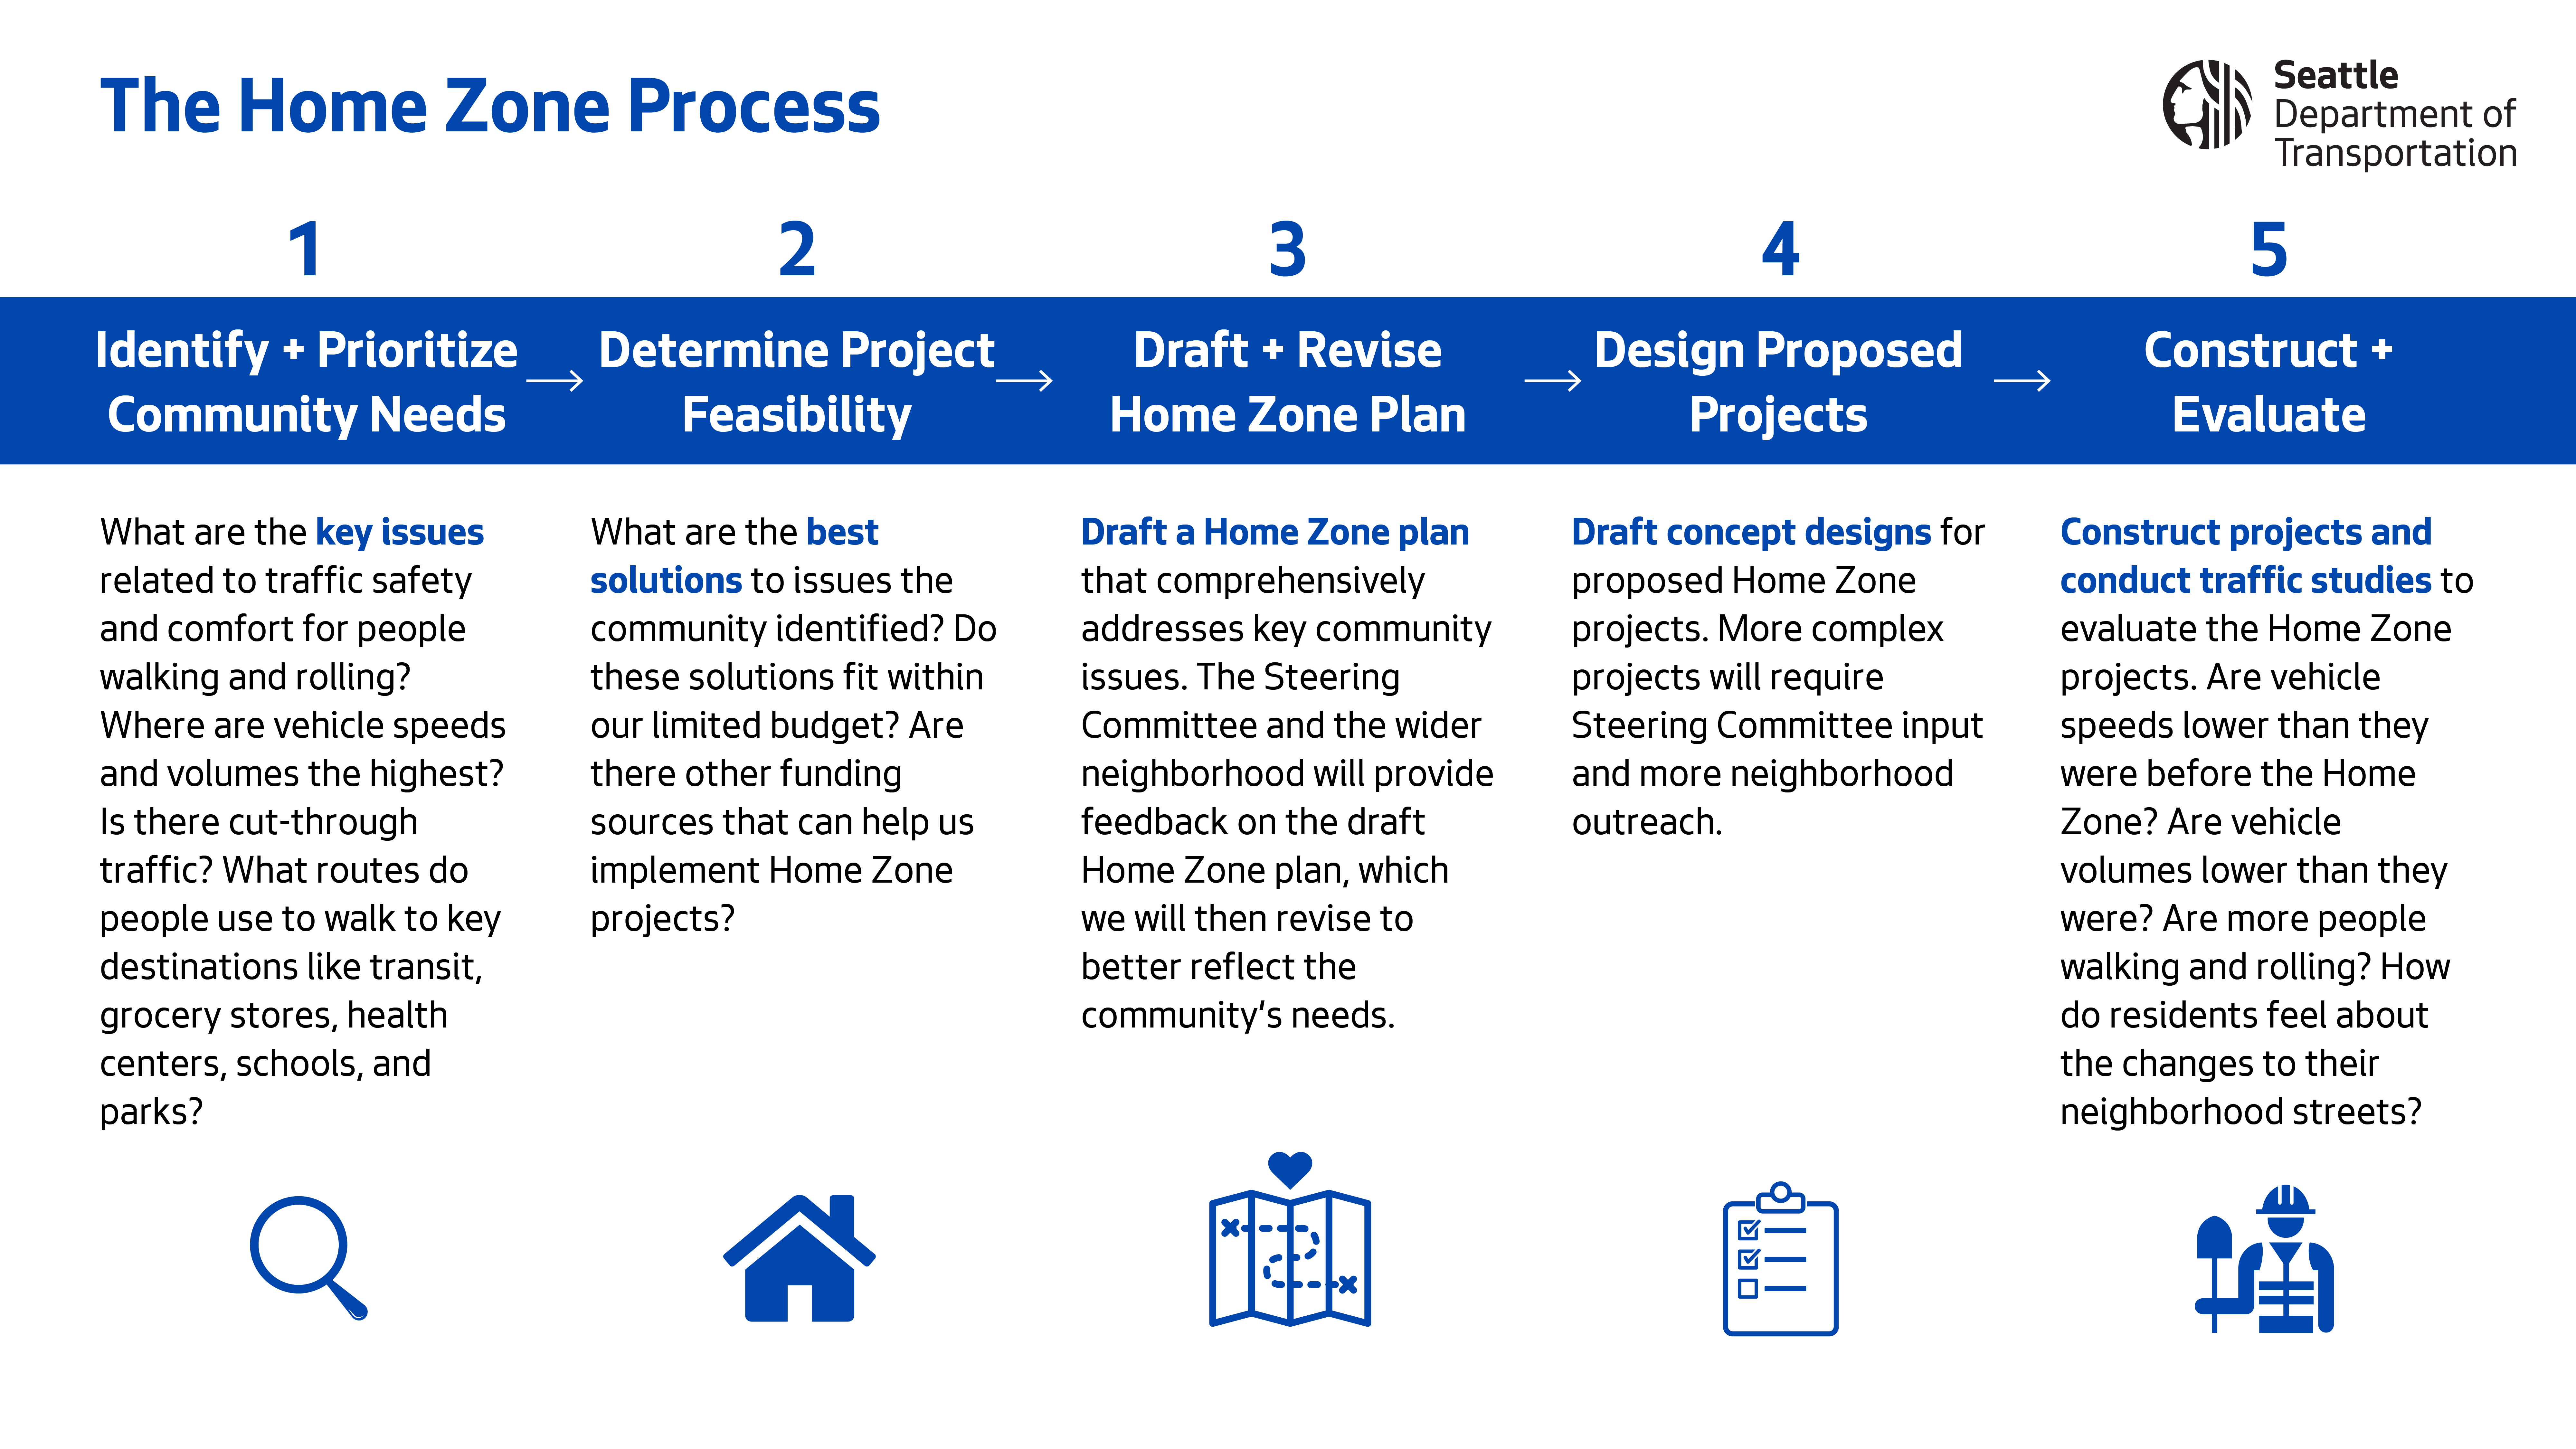 An image describing the steps of the Home Zone planning process. Step 1 is to identify key safety issues and prioritize those issues. Step 2 is to determine possible solutions that fit within the Home Zone budget. Step 3 is to draft a neighborhood-wide Home Zone plan, which will be reviewed by the Steering Committee and the larger neighborhood. Step 4 is to design the projects once the Home Zone plan is approved. Step 5 is to construct the projects the year after the Home Zone plan is approved by the community and to follow up with traffic studies and other evaluations to determine how effective the Home Zone projects were.